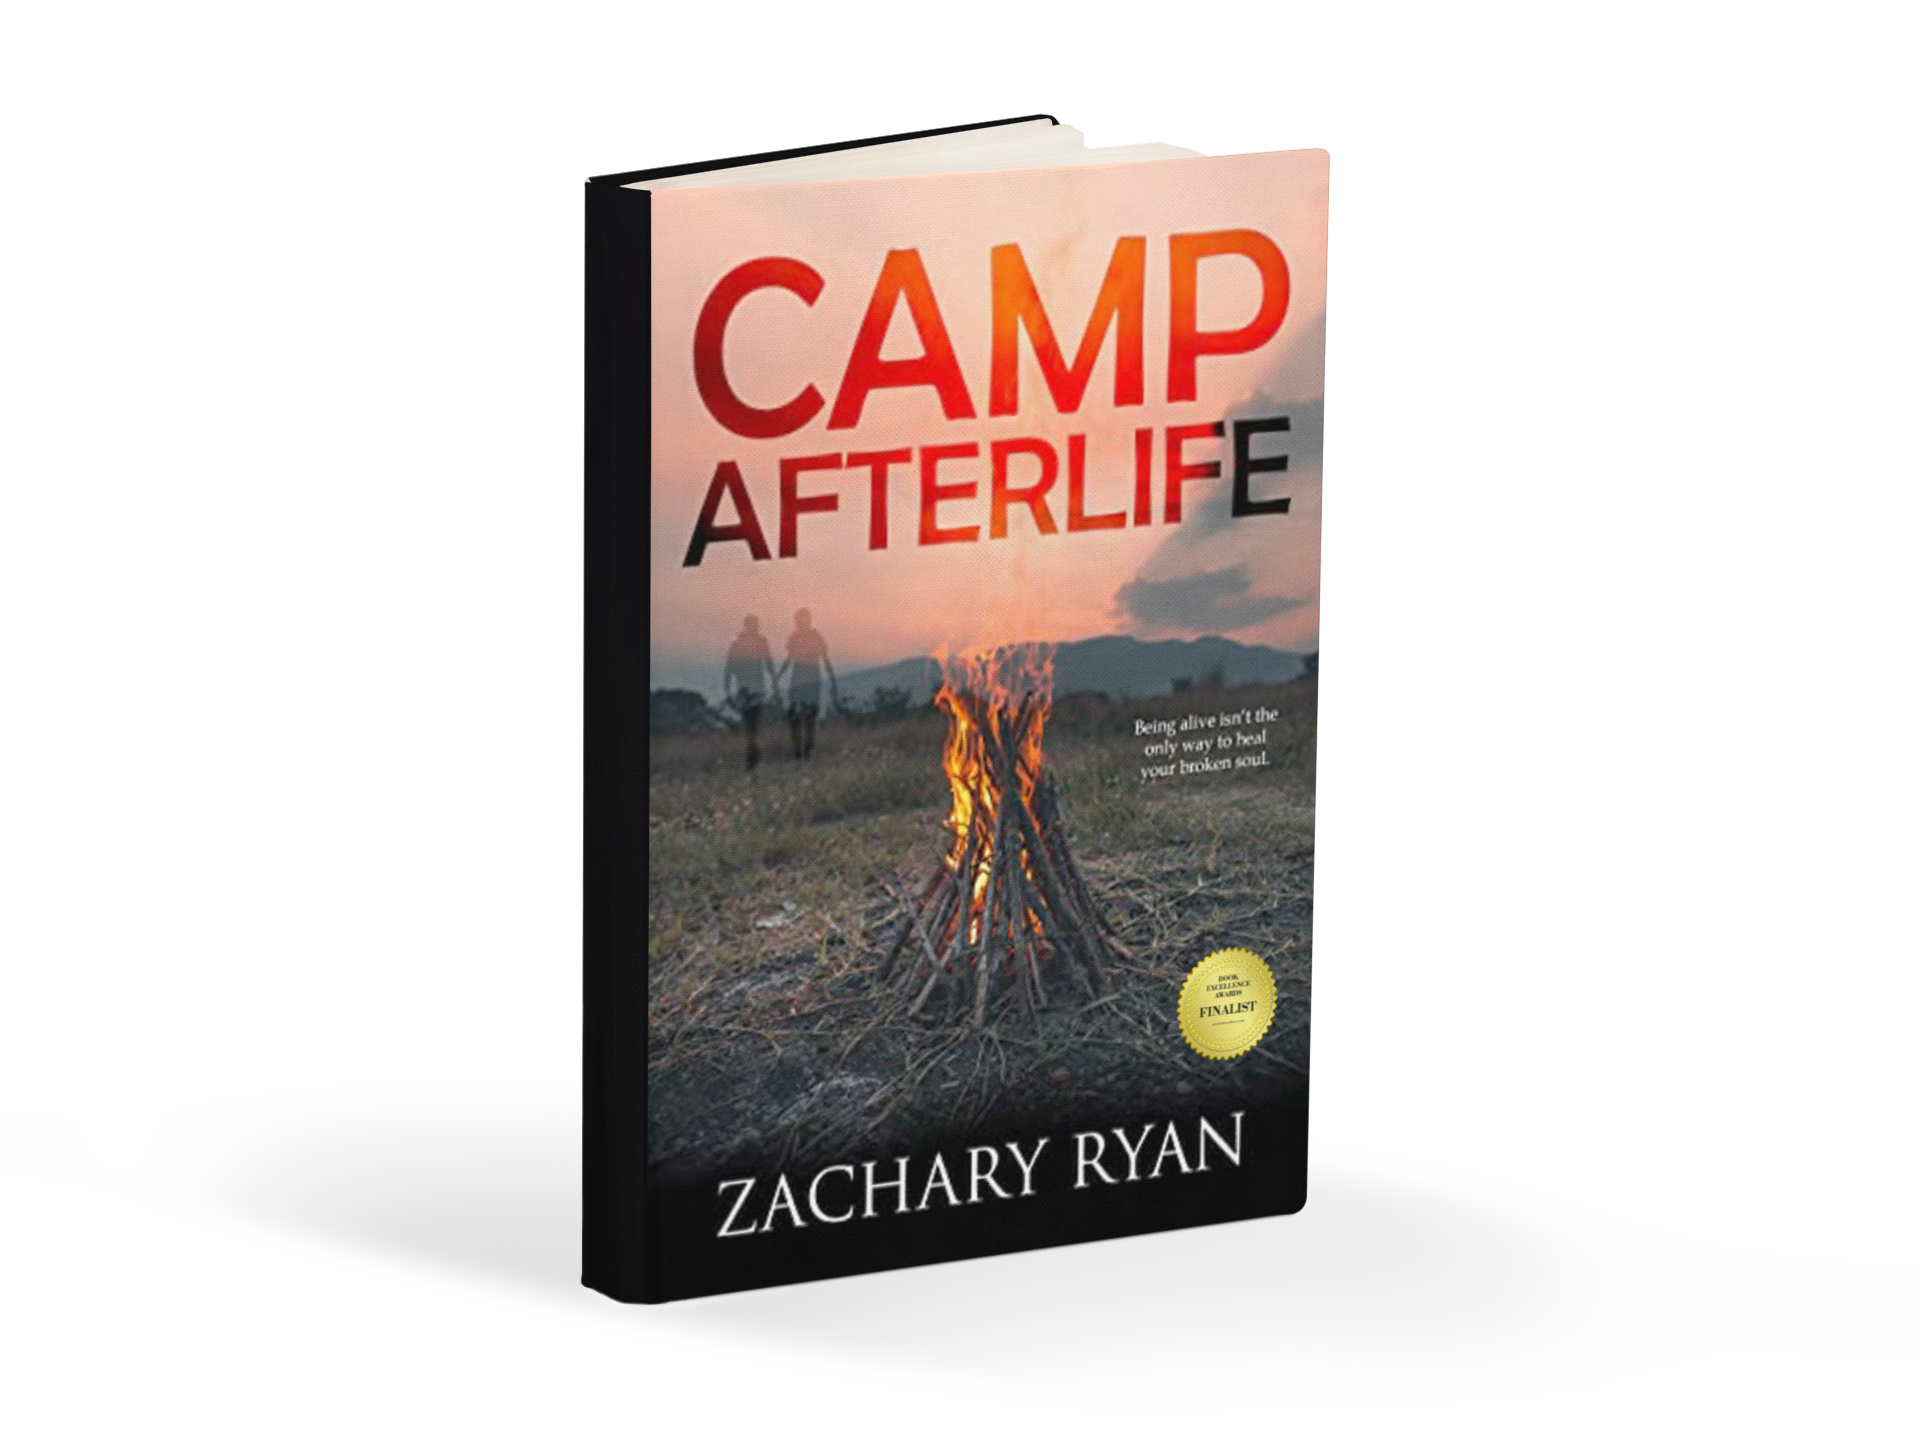 Zachary Ryan’s Camp Afterlife is Recognized as a Finalist in International Book Contest